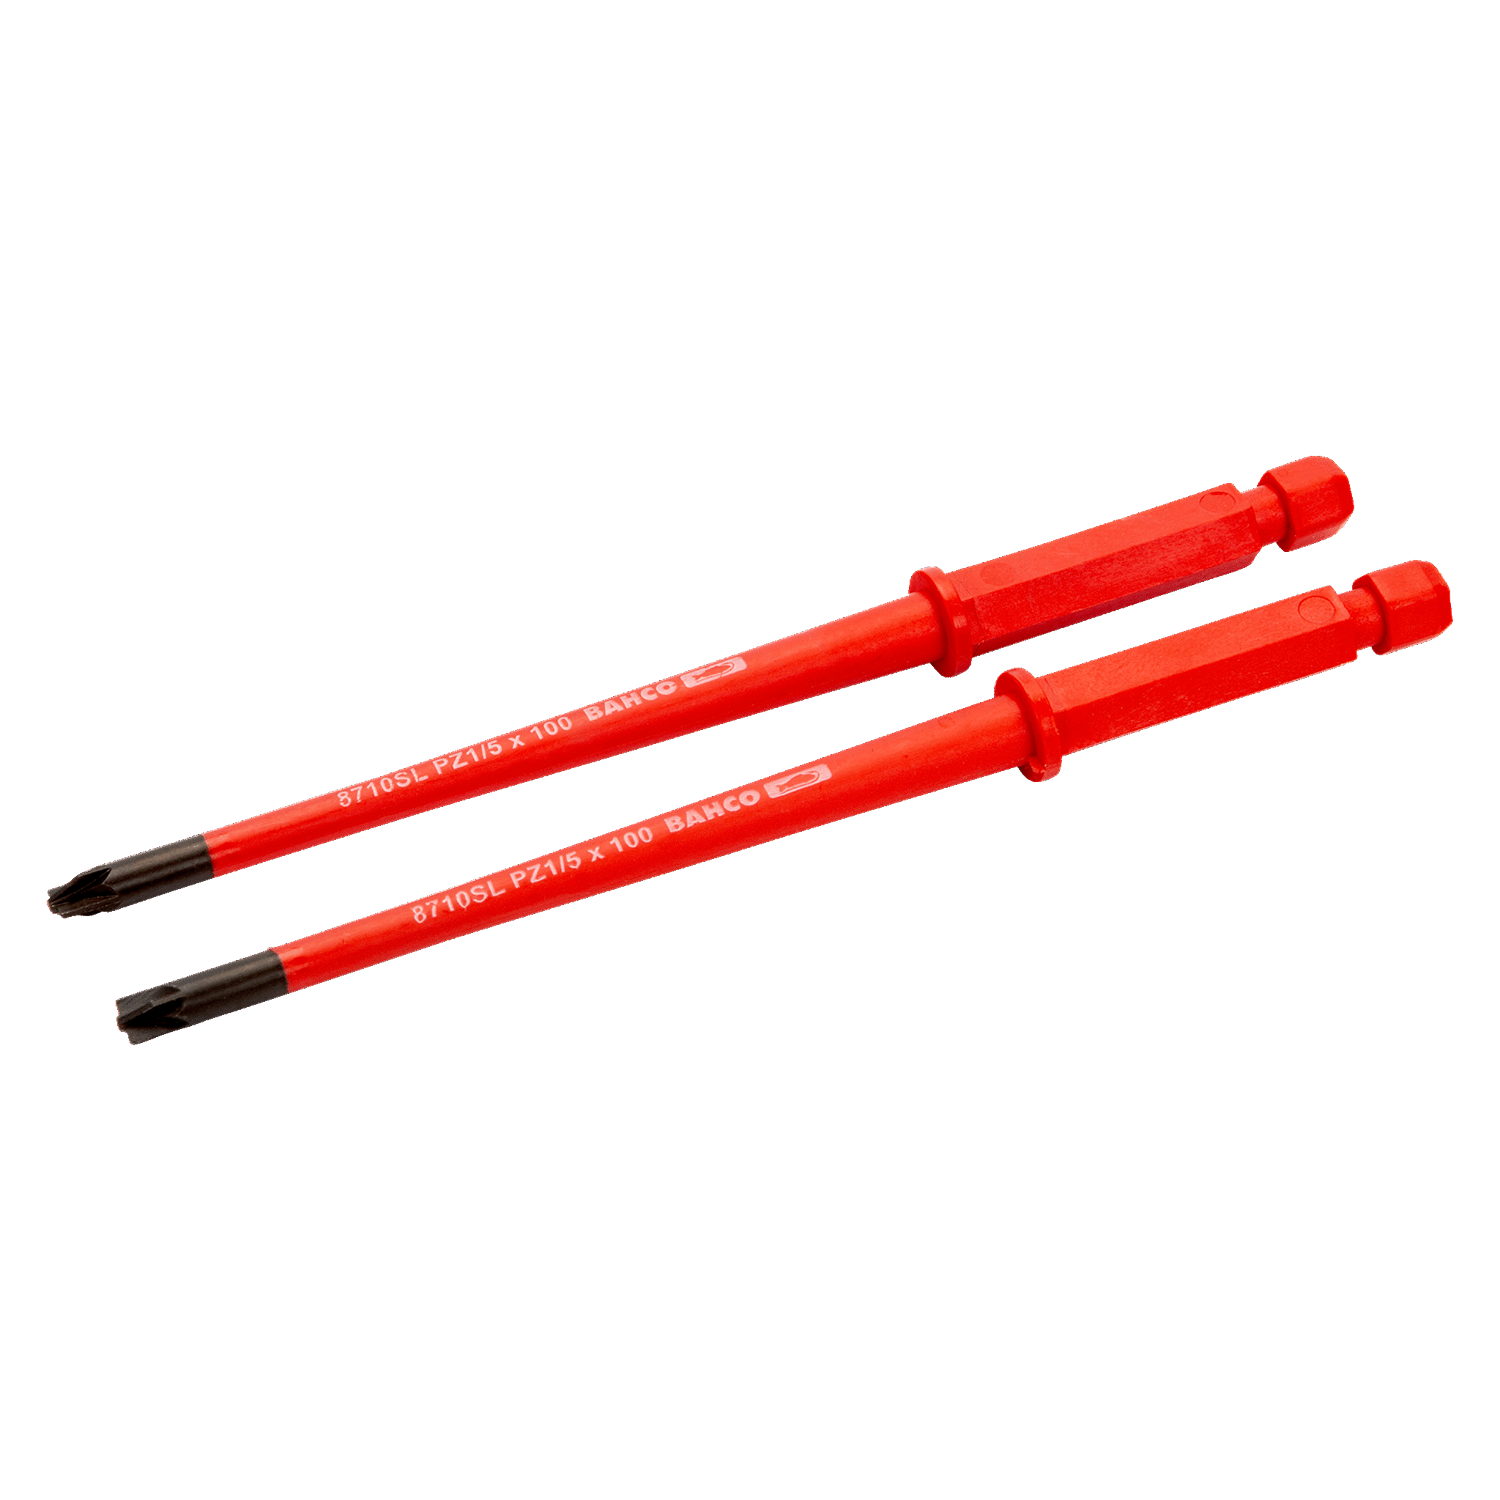 BAHCO 8710SL-2P - 8720SL-2P Insulated Combi-Tip Screwdriver Blade - Premium Screwdriver Blade from BAHCO - Shop now at Yew Aik.